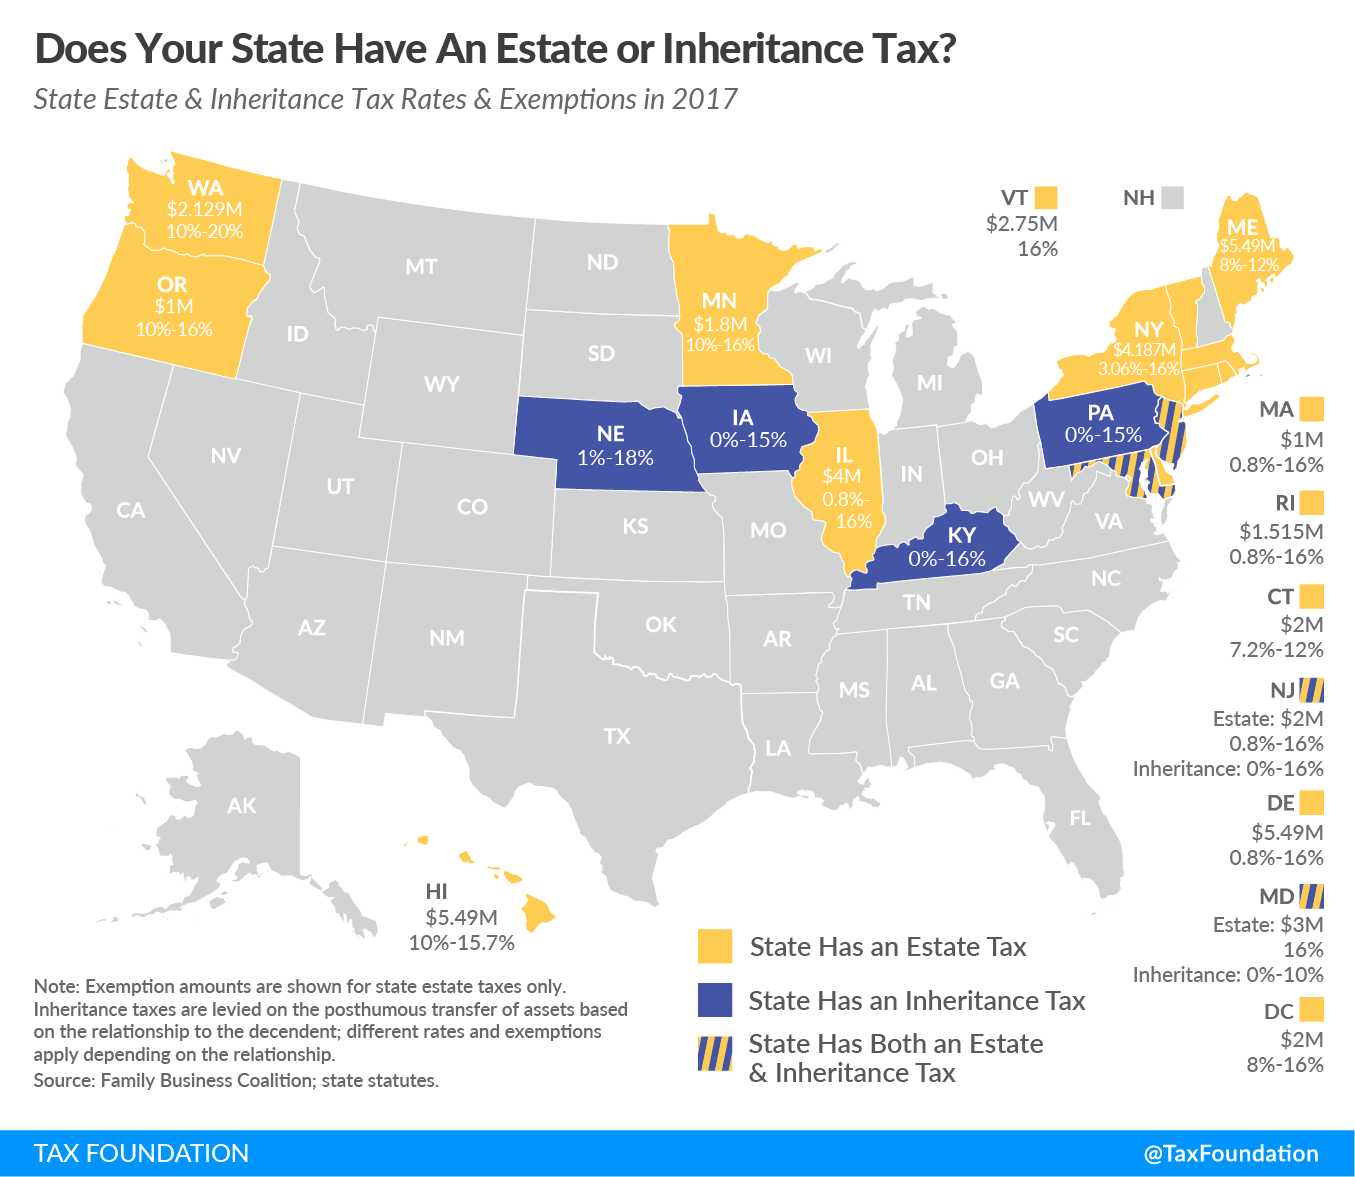 Does Your State Have an Estate or Inheritance Tax?